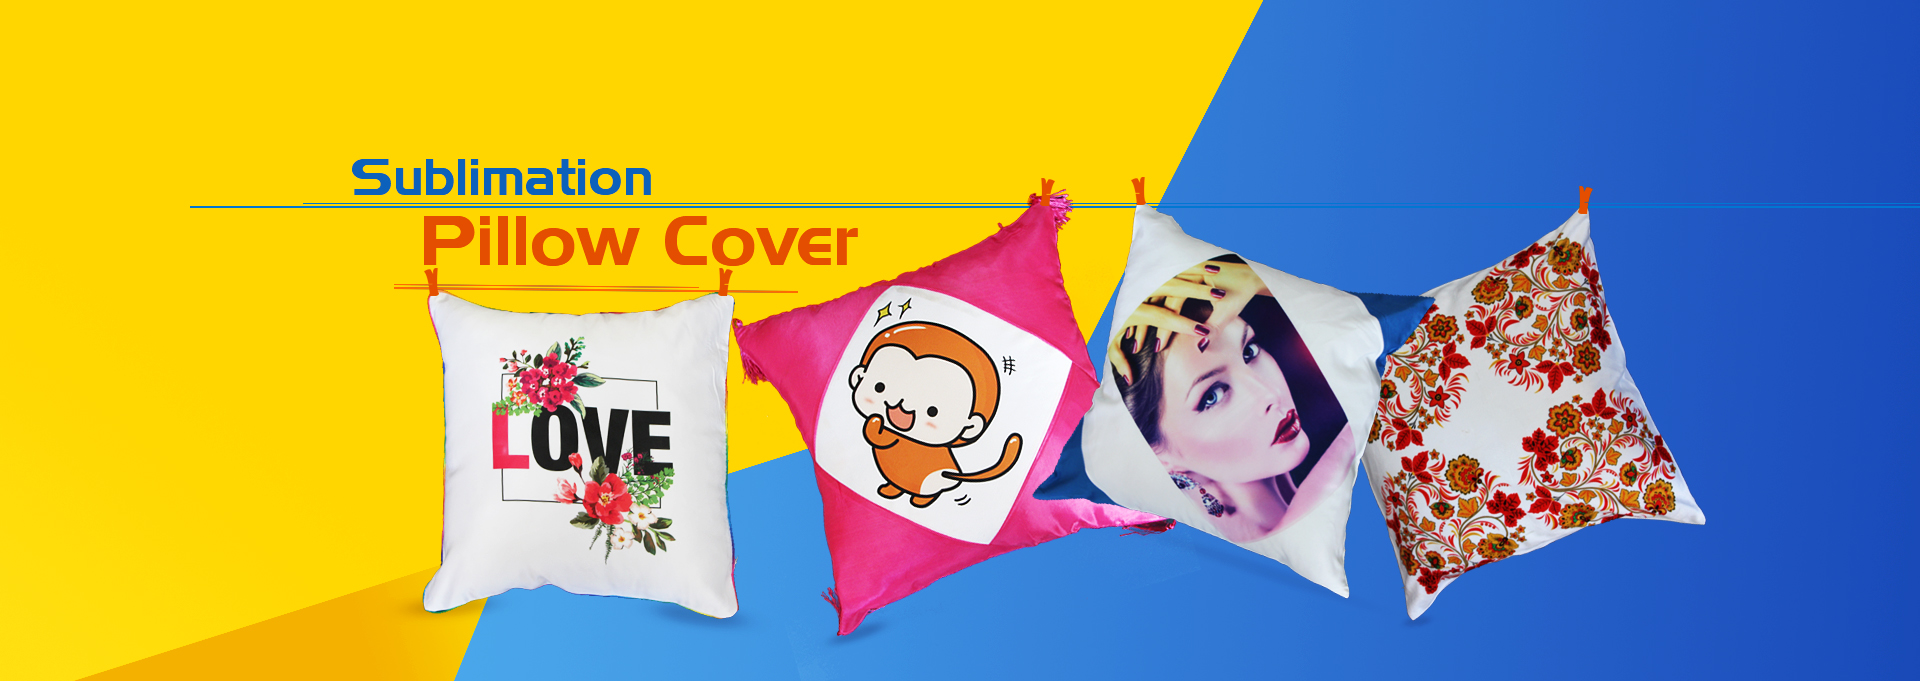 Sublimation Pillow Cover